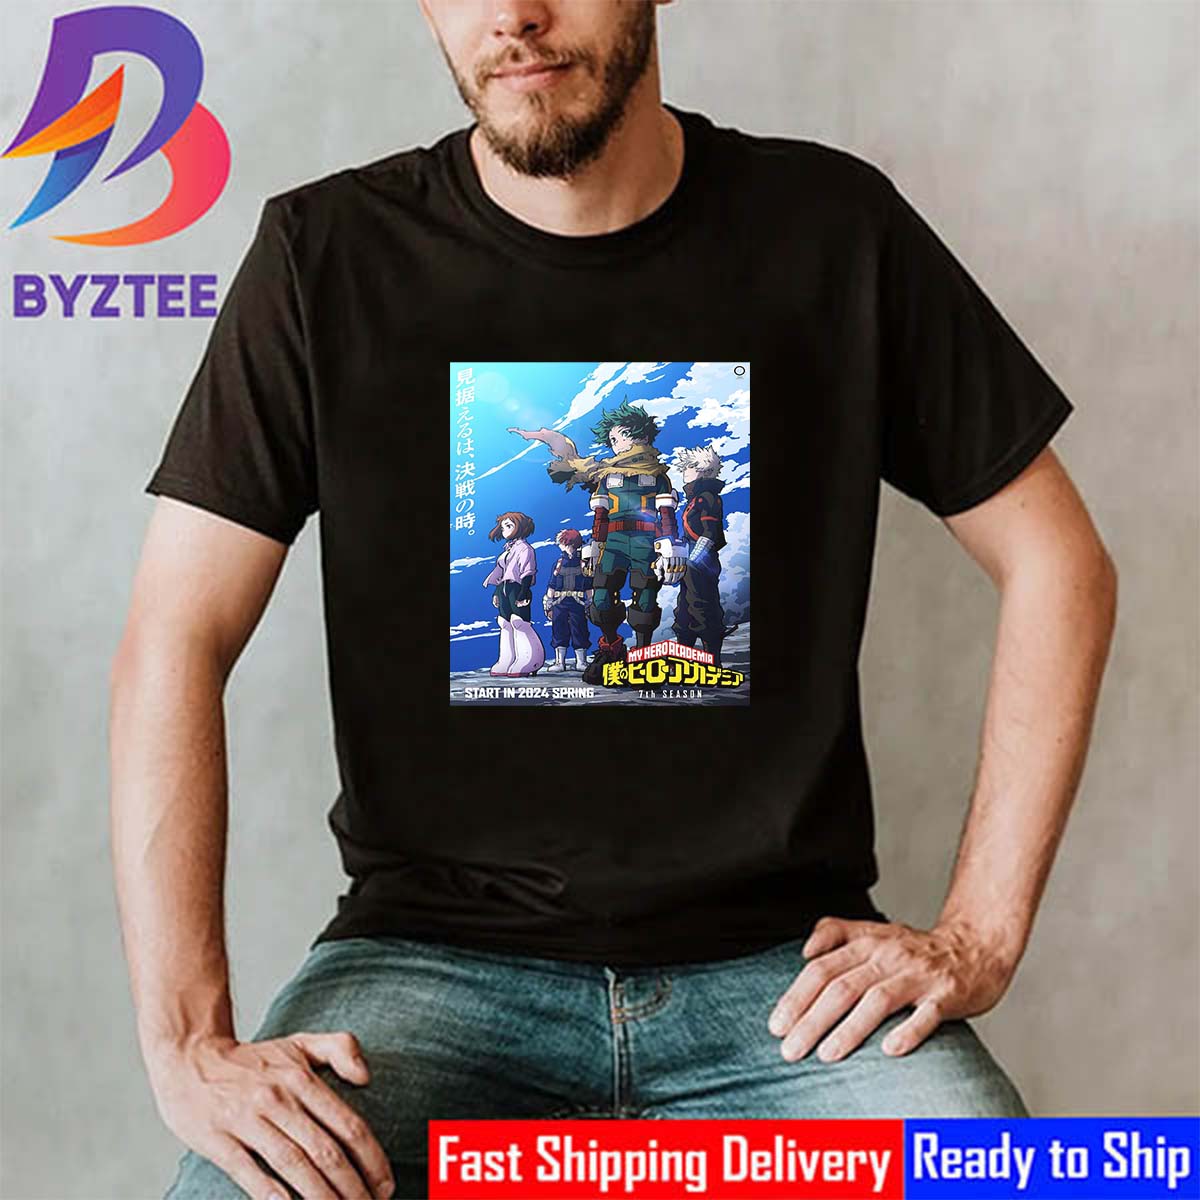 Official Poster For My Hero Academia Season 7 Releasing In 2024 Spring Classic  T-Shirt - Byztee